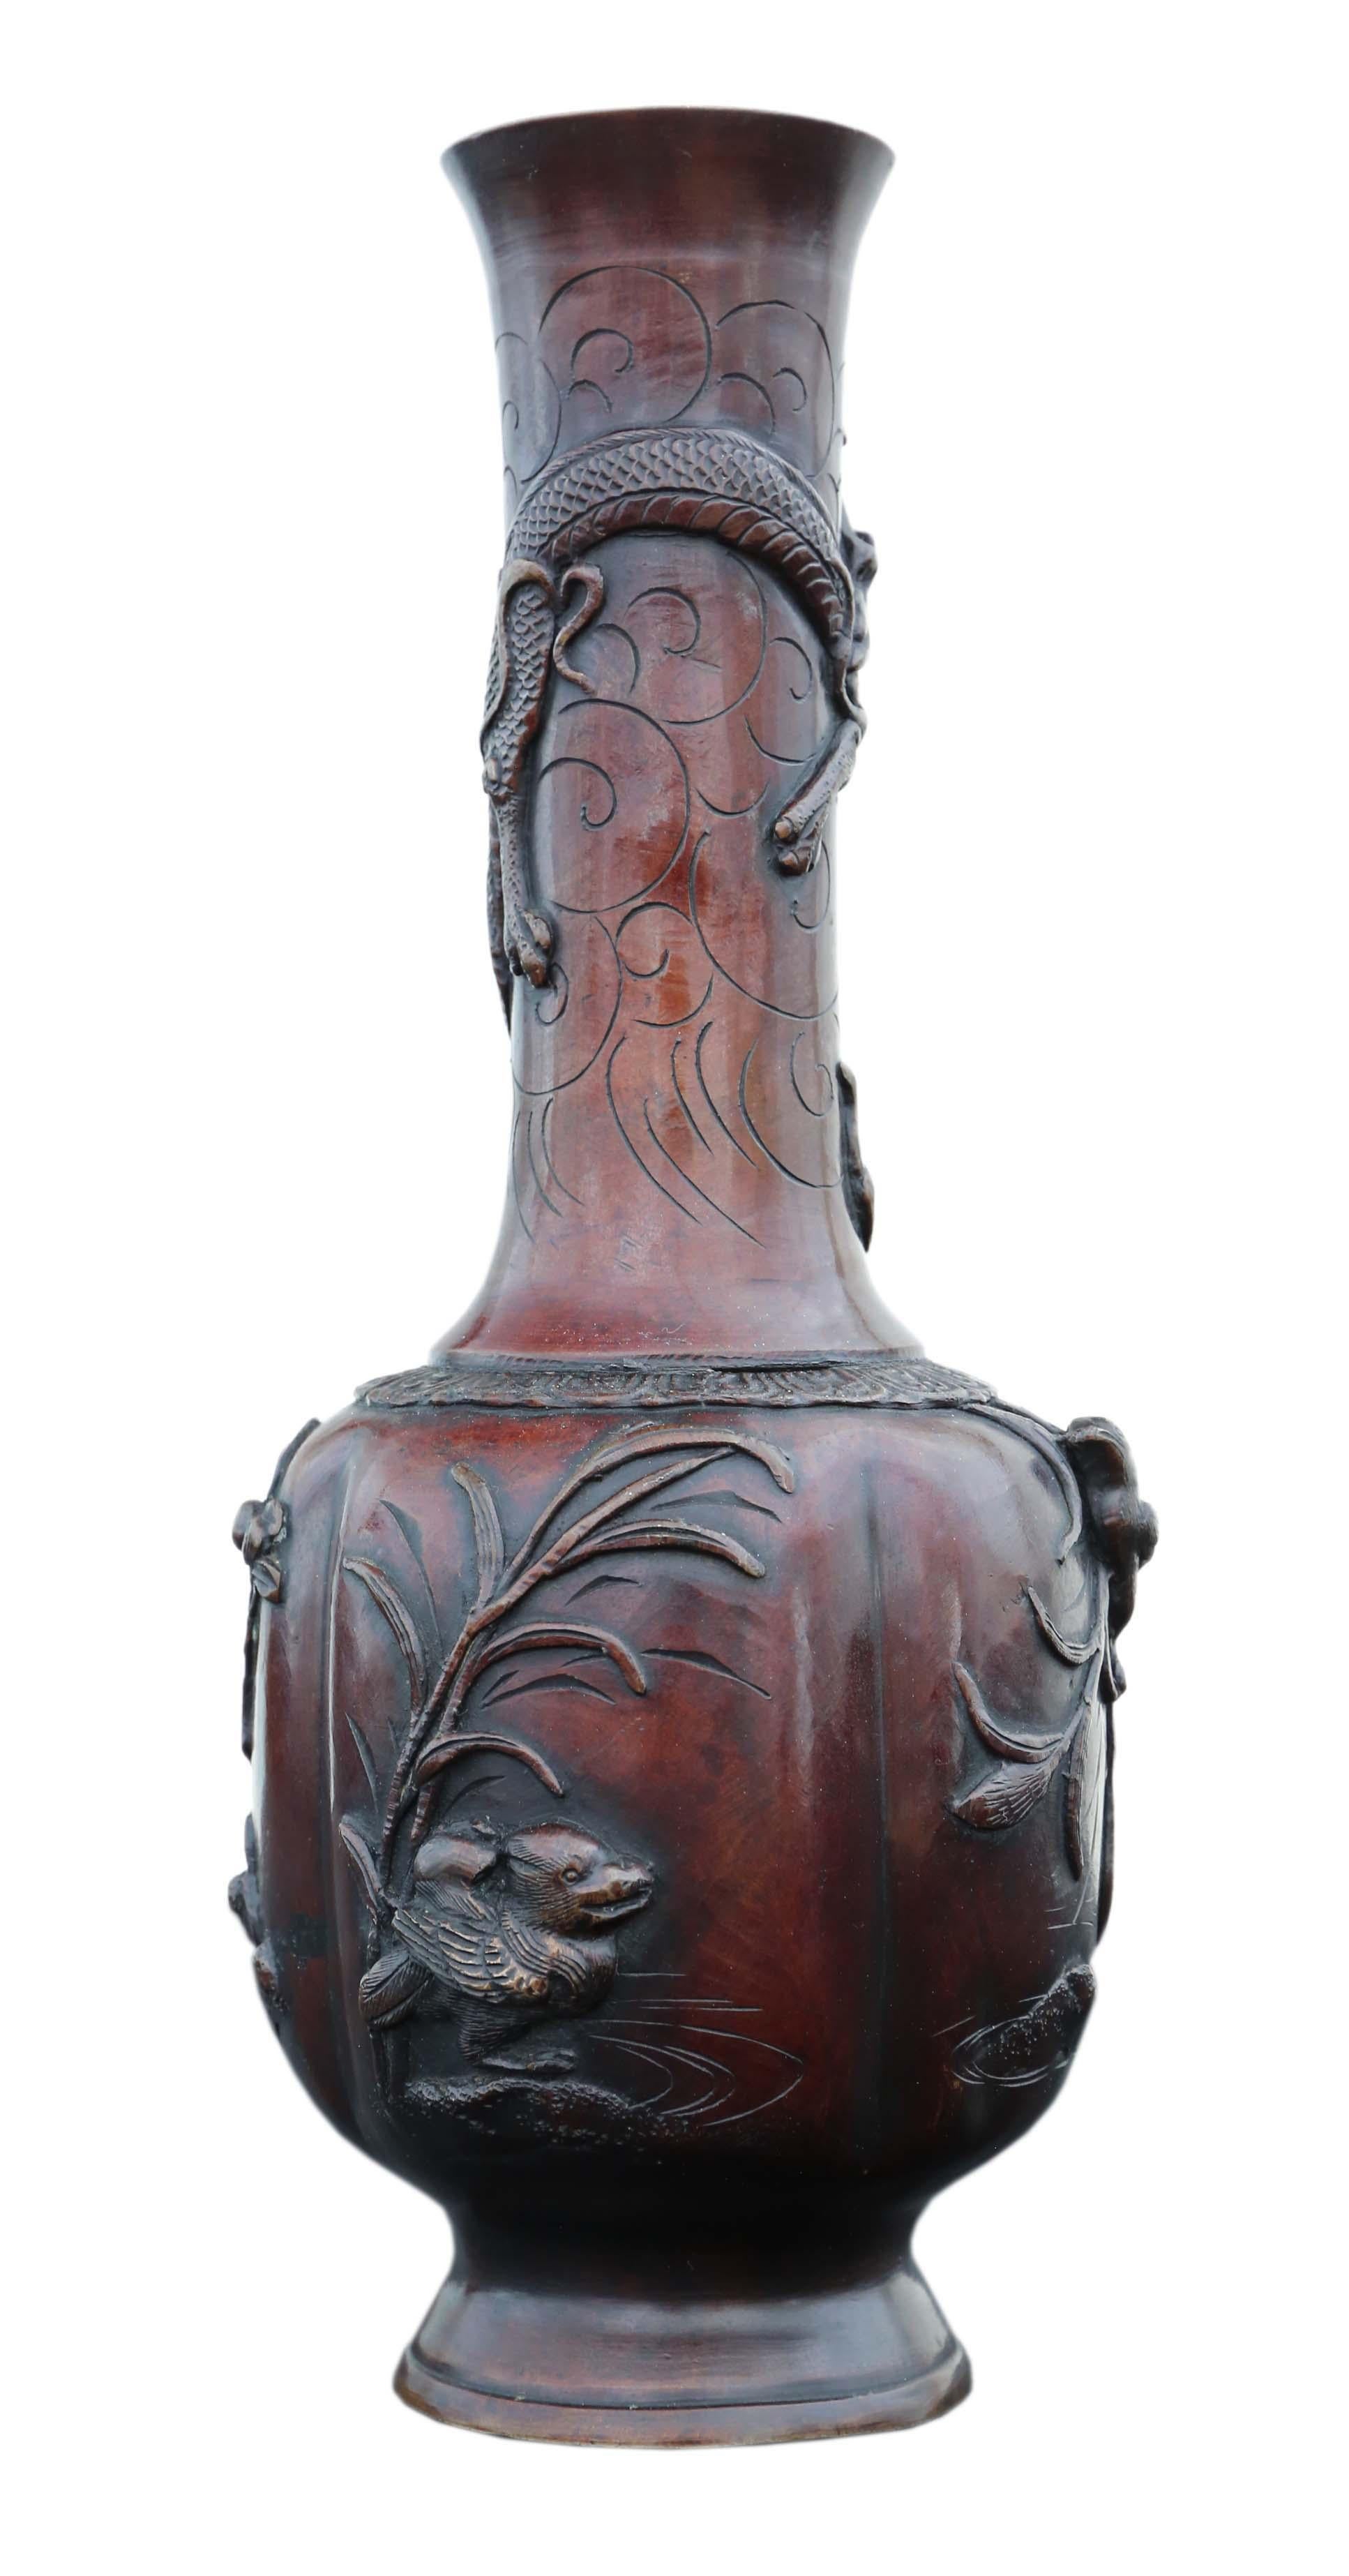 Japanese Meiji period bronze vase.
Would look amazing in the right location. The very best color and patina.
Overall maximum dimensions: 31 cm high x 14 cm diameter (inner mouth 4.5cm diameter). Weighs 1.5Kg.
In very good antique condition with